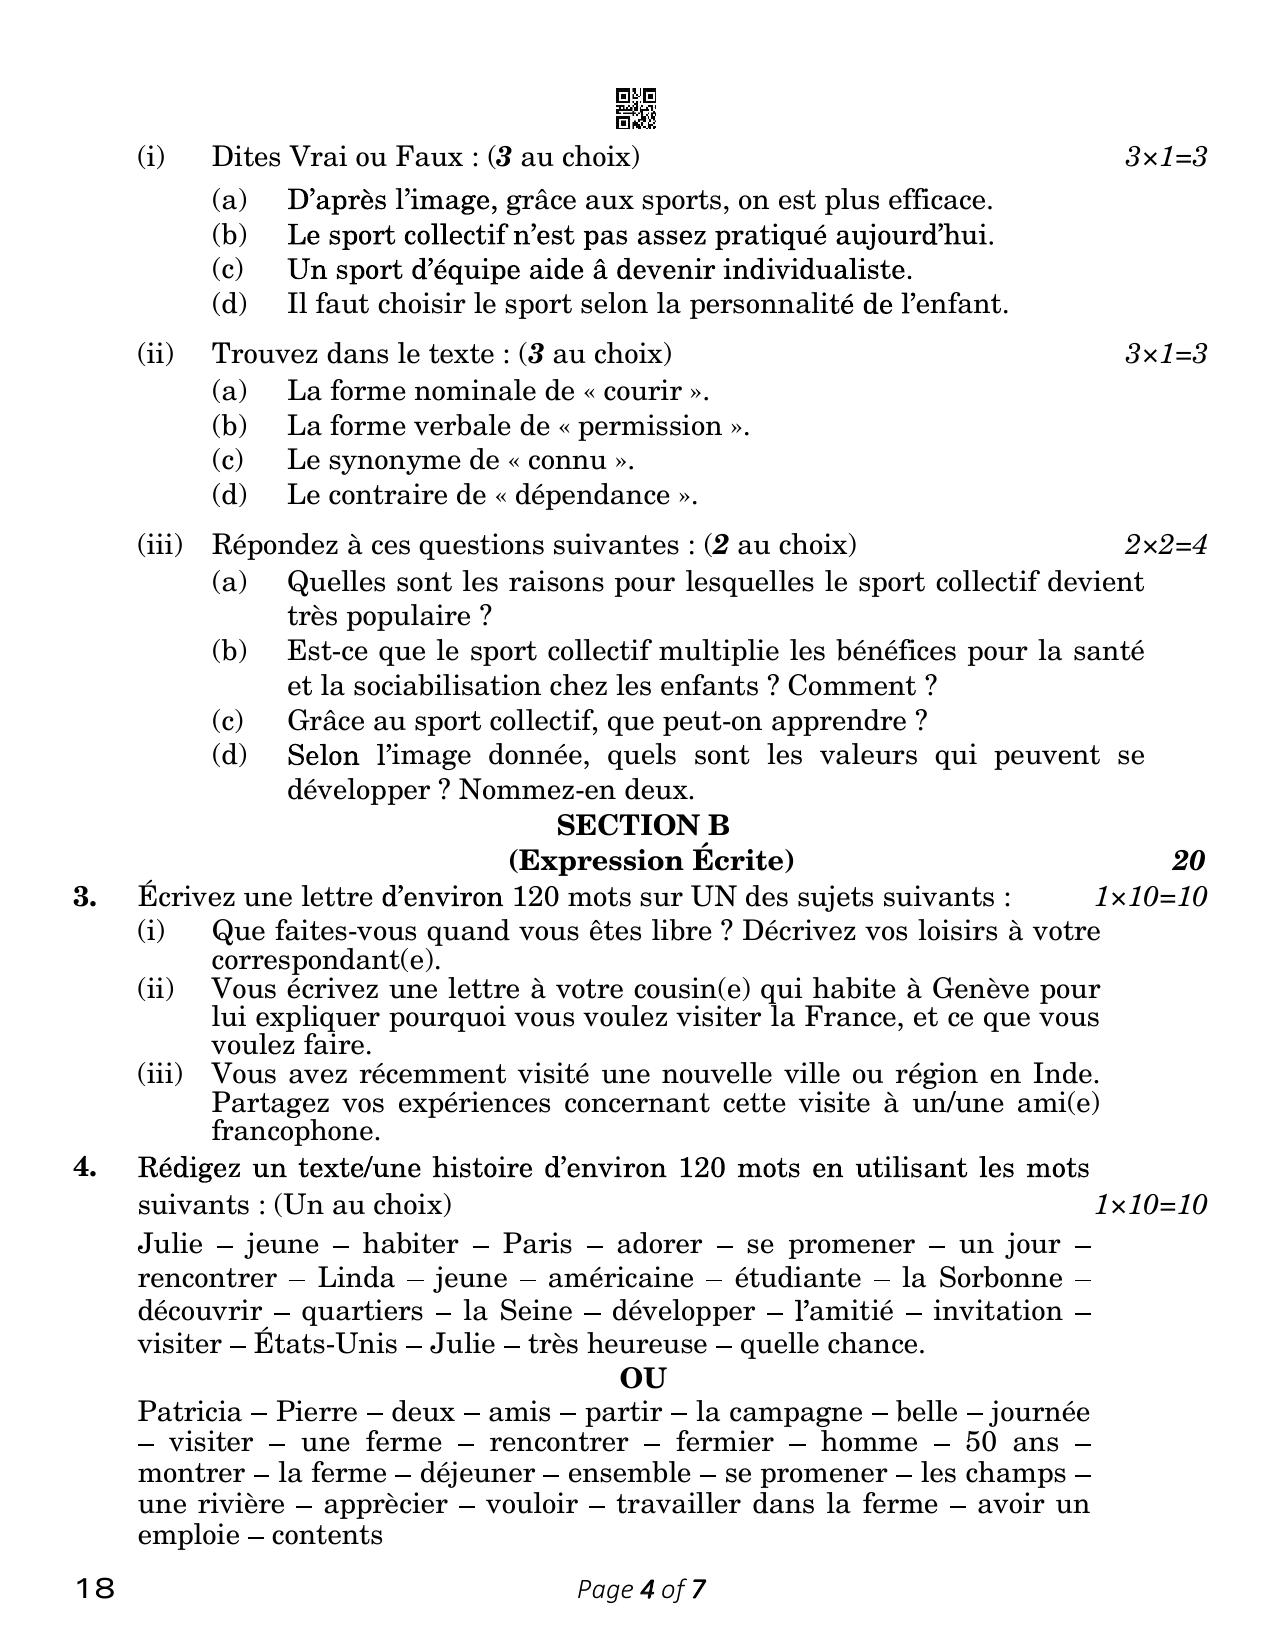 CBSE Class 12 French (Compartment) 2023 Question Paper - Page 4